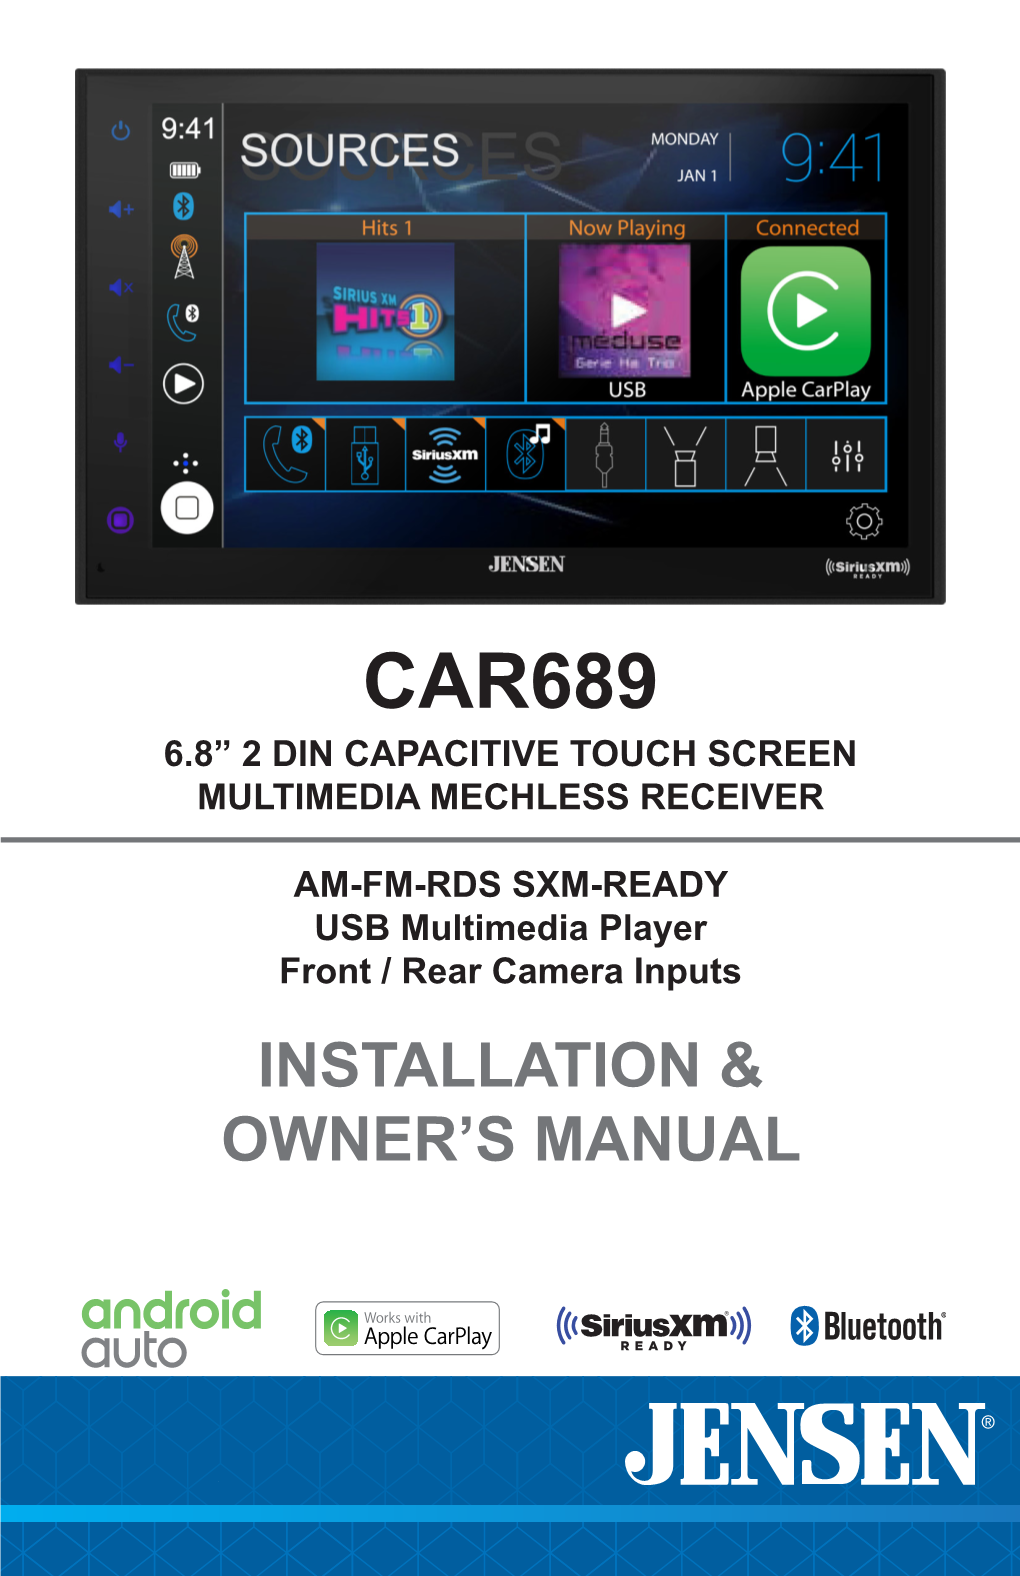 Car689 6.8” 2 Din Capacitive Touch Screen Multimedia Mechless Receiver